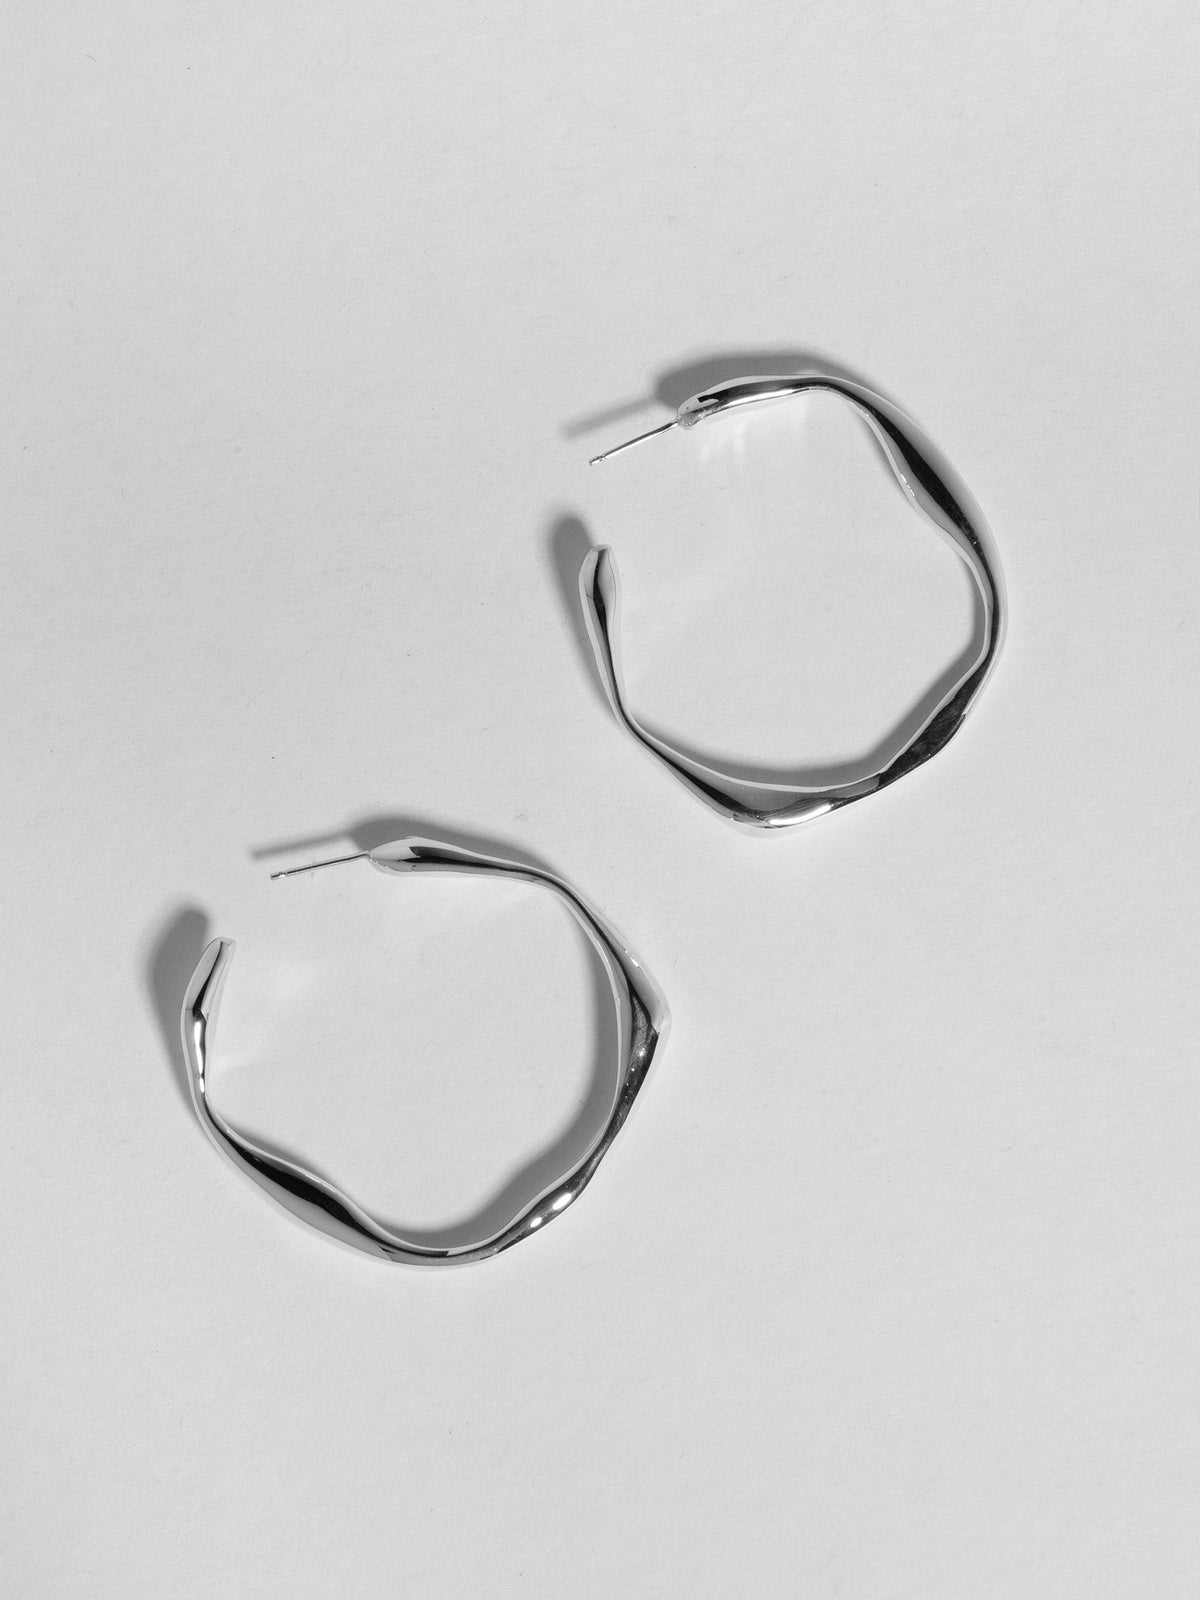 Product image of FARIS ONDA Hoop Medium in sterling silver, laid side by side, staggered